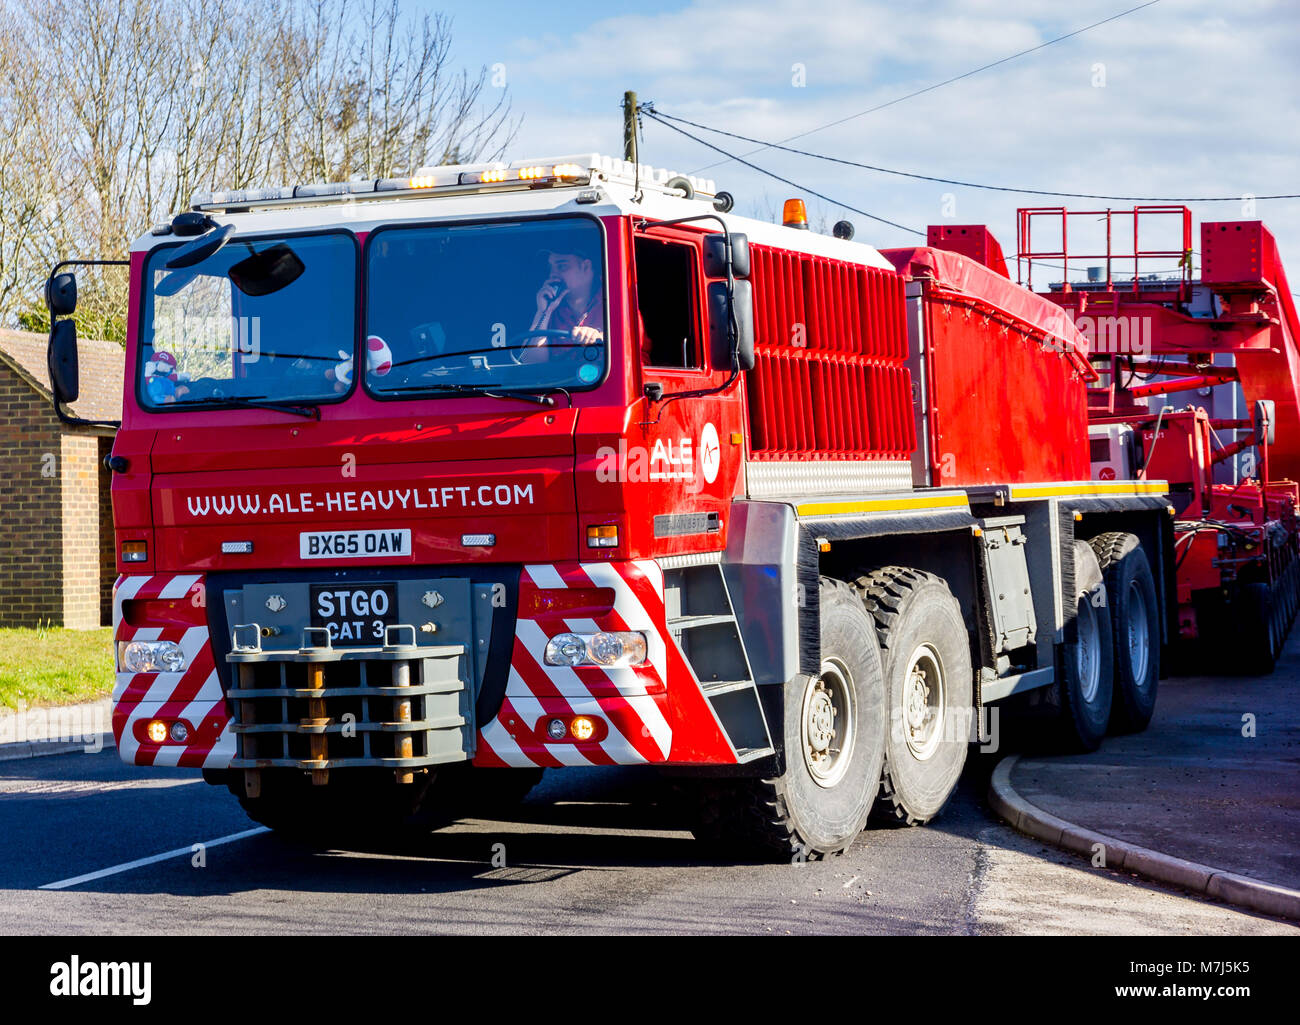 Potmans Lane, Ninfield, East Sussex, UK. 11th March 2018. Sussex police in conjunction with Highways England escort an abnormal load from Shoreham to its destination of Ninfield in East Sussex. The 78 meter long generator weighing in excess of 330 tonnes started its journey at 5.30am arriving shortly after 2pm. Credit: Alan Fraser Stock Photo